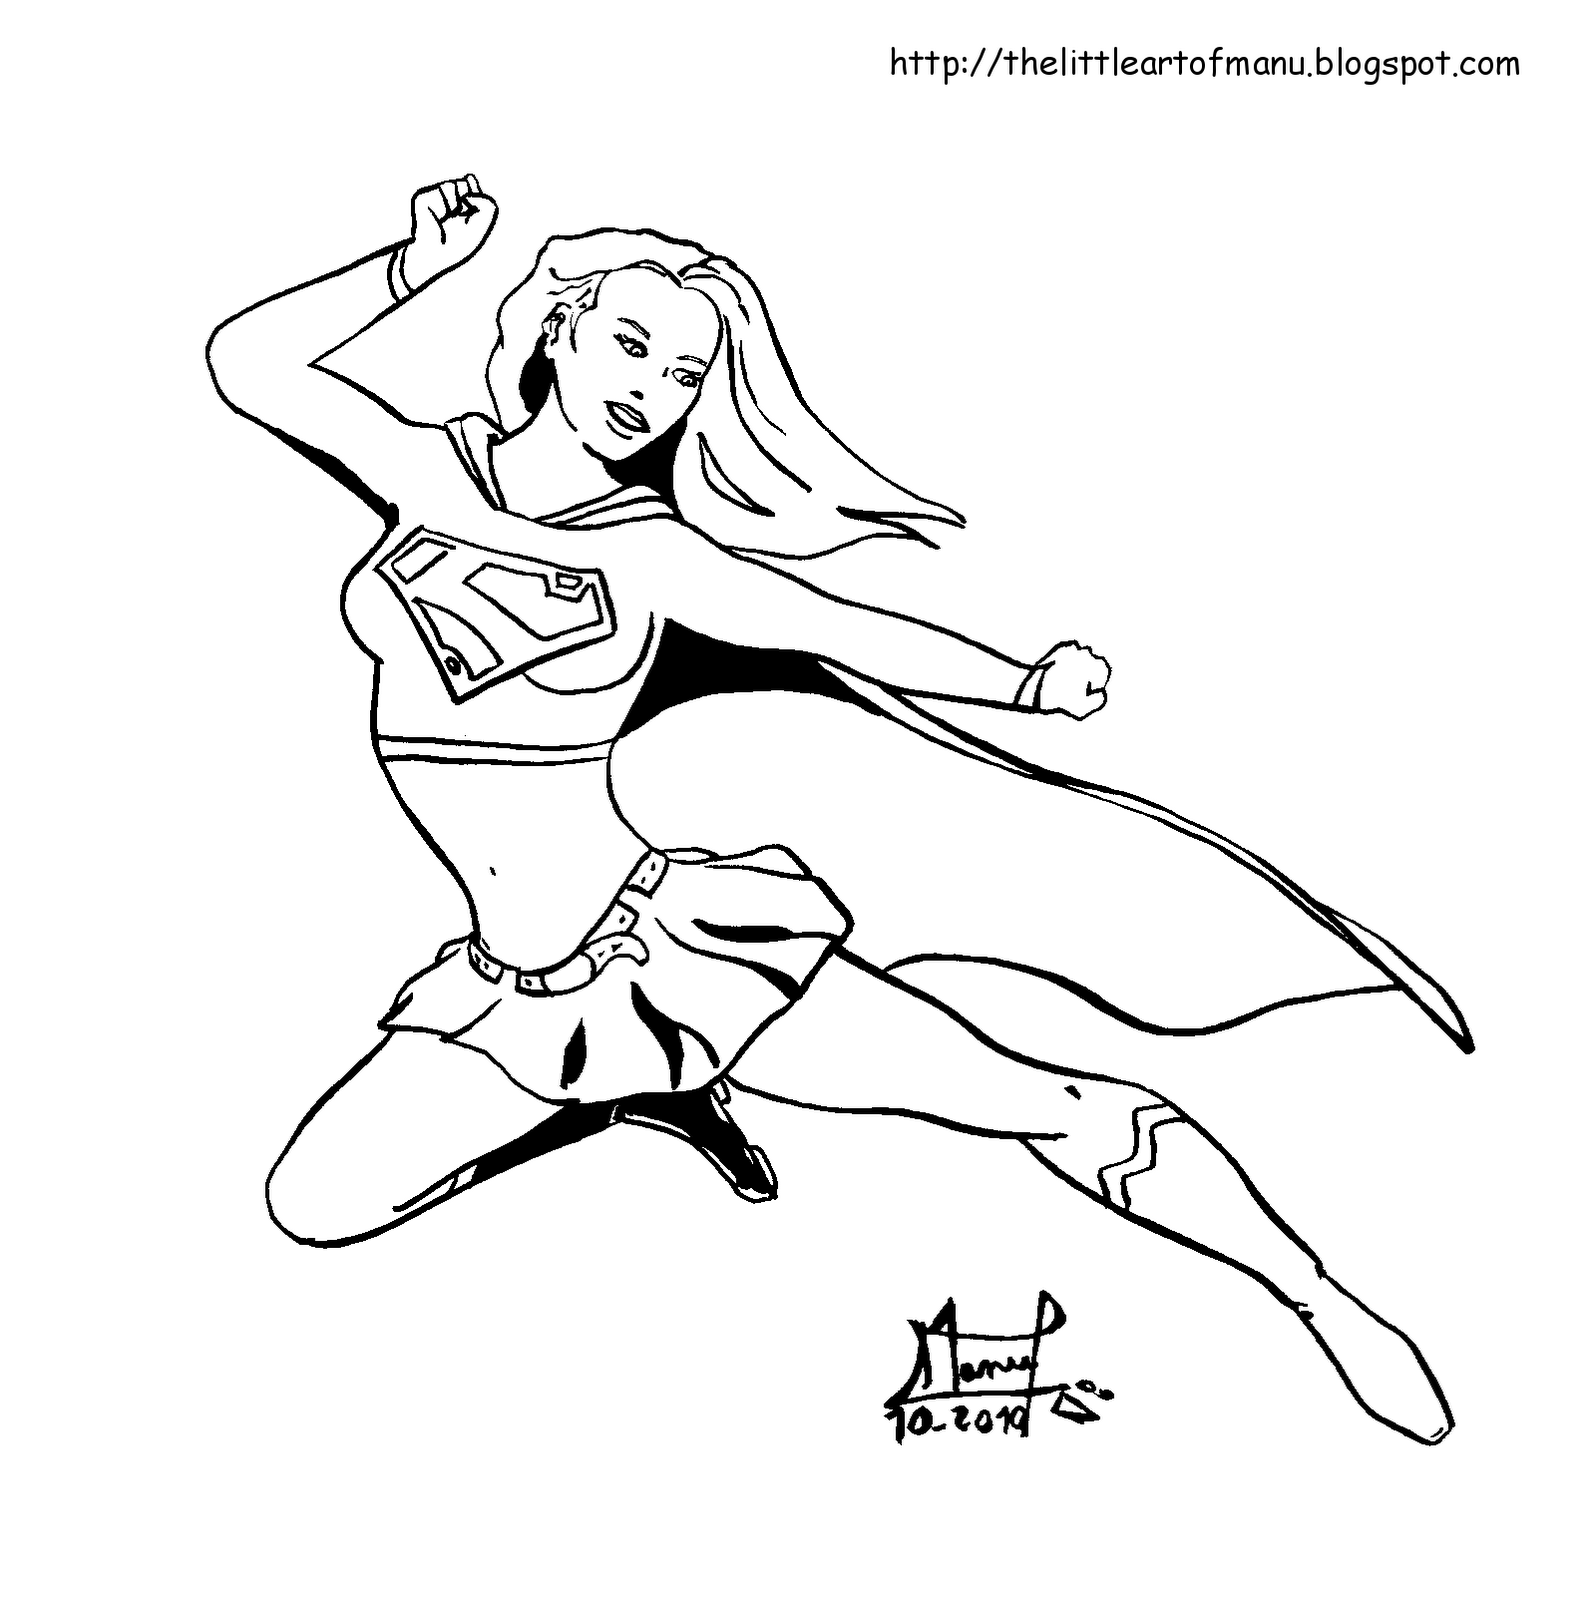 Coloring page supergirl superheroes â printable coloring pages